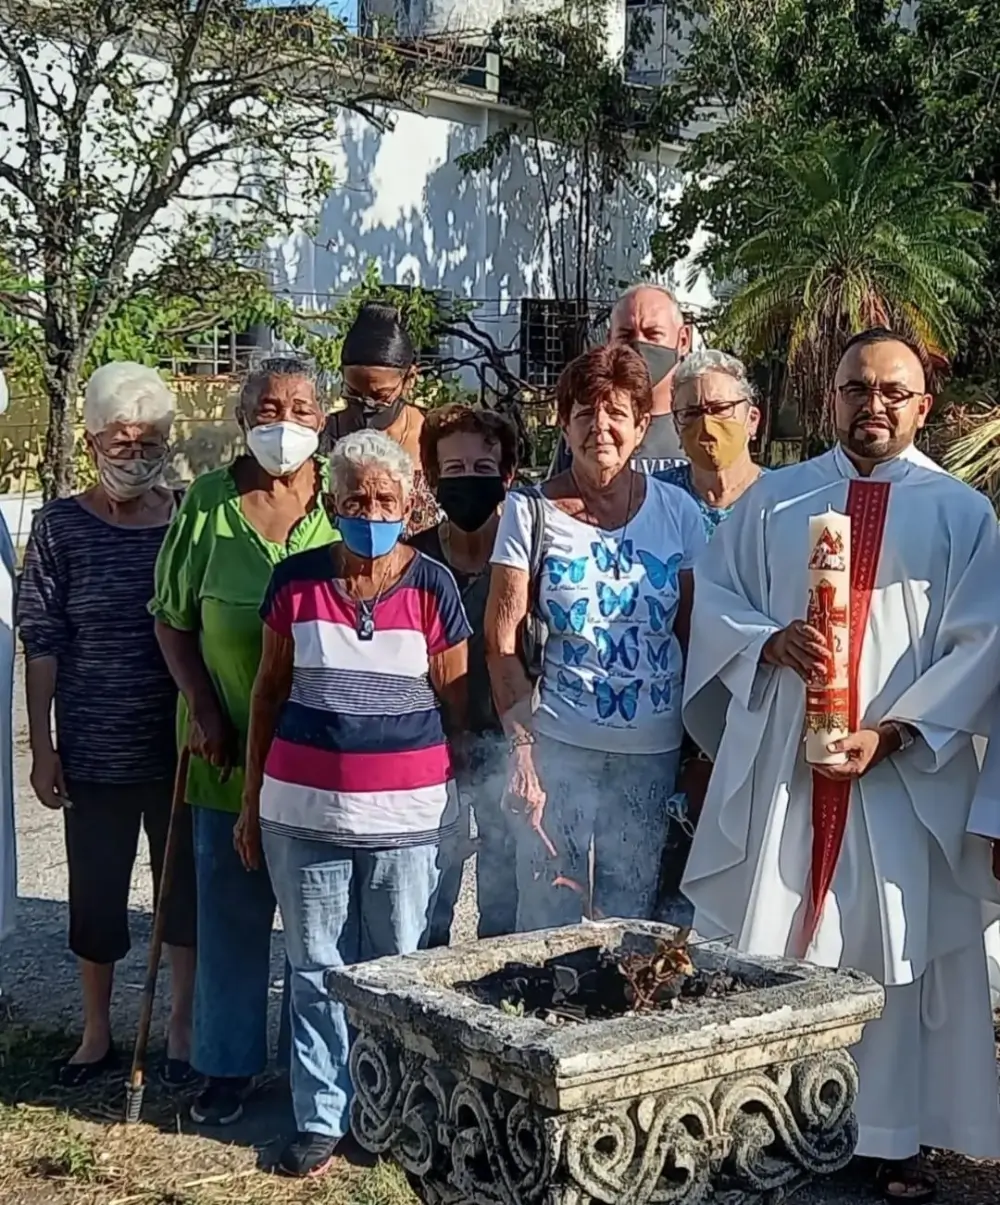 A group of people posing with a priest holding a candle